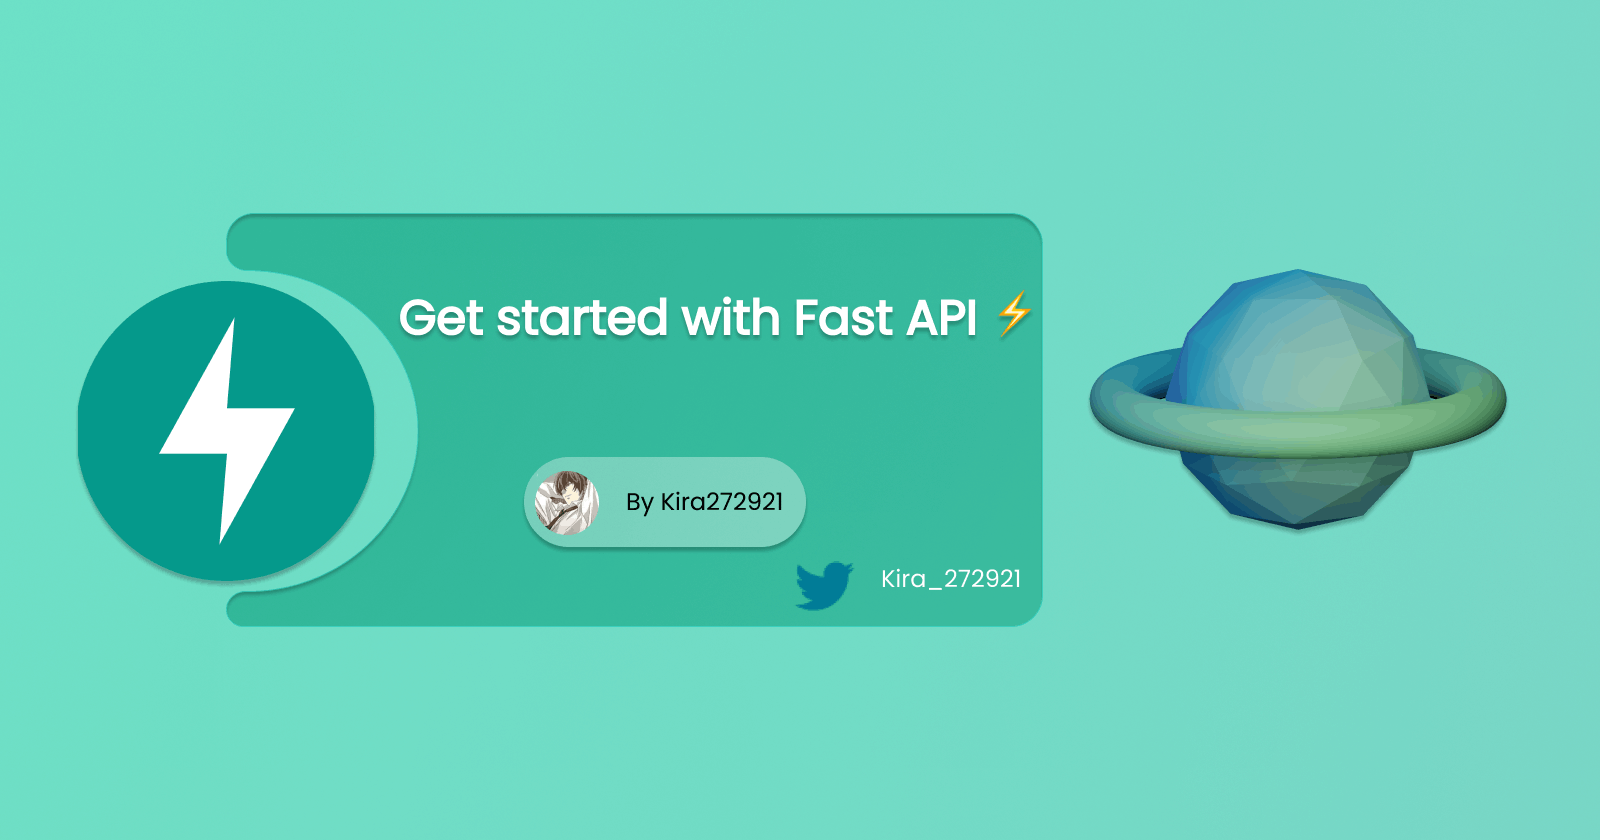 Get started with Fast API ⚡🚀